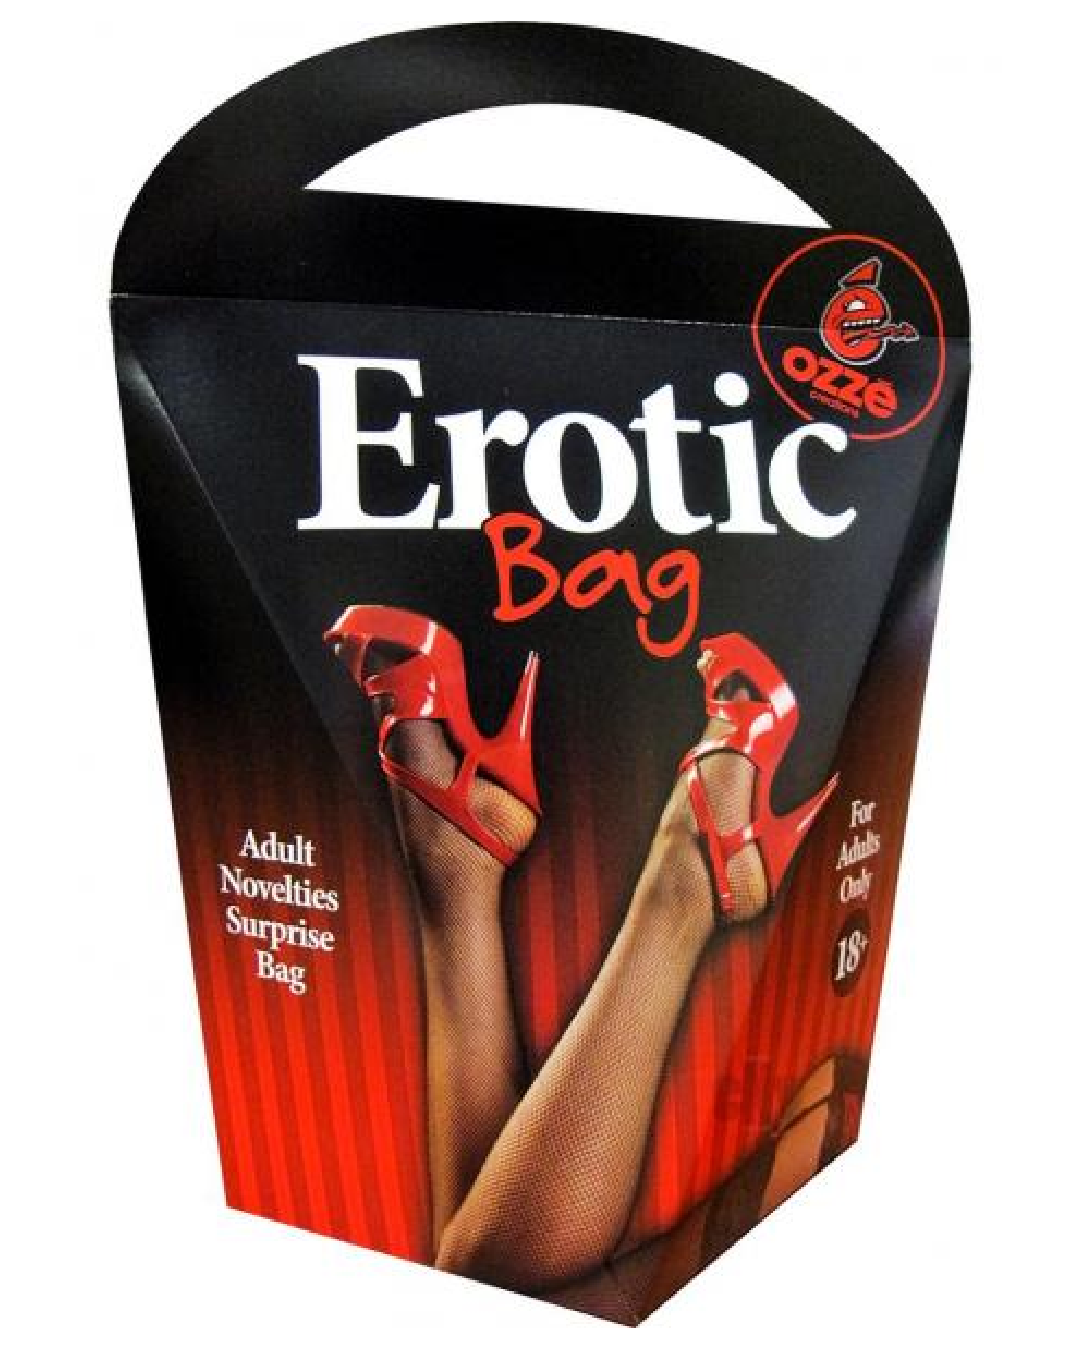 Erotic surprise gift bag box black and red with model wearing red shoes 